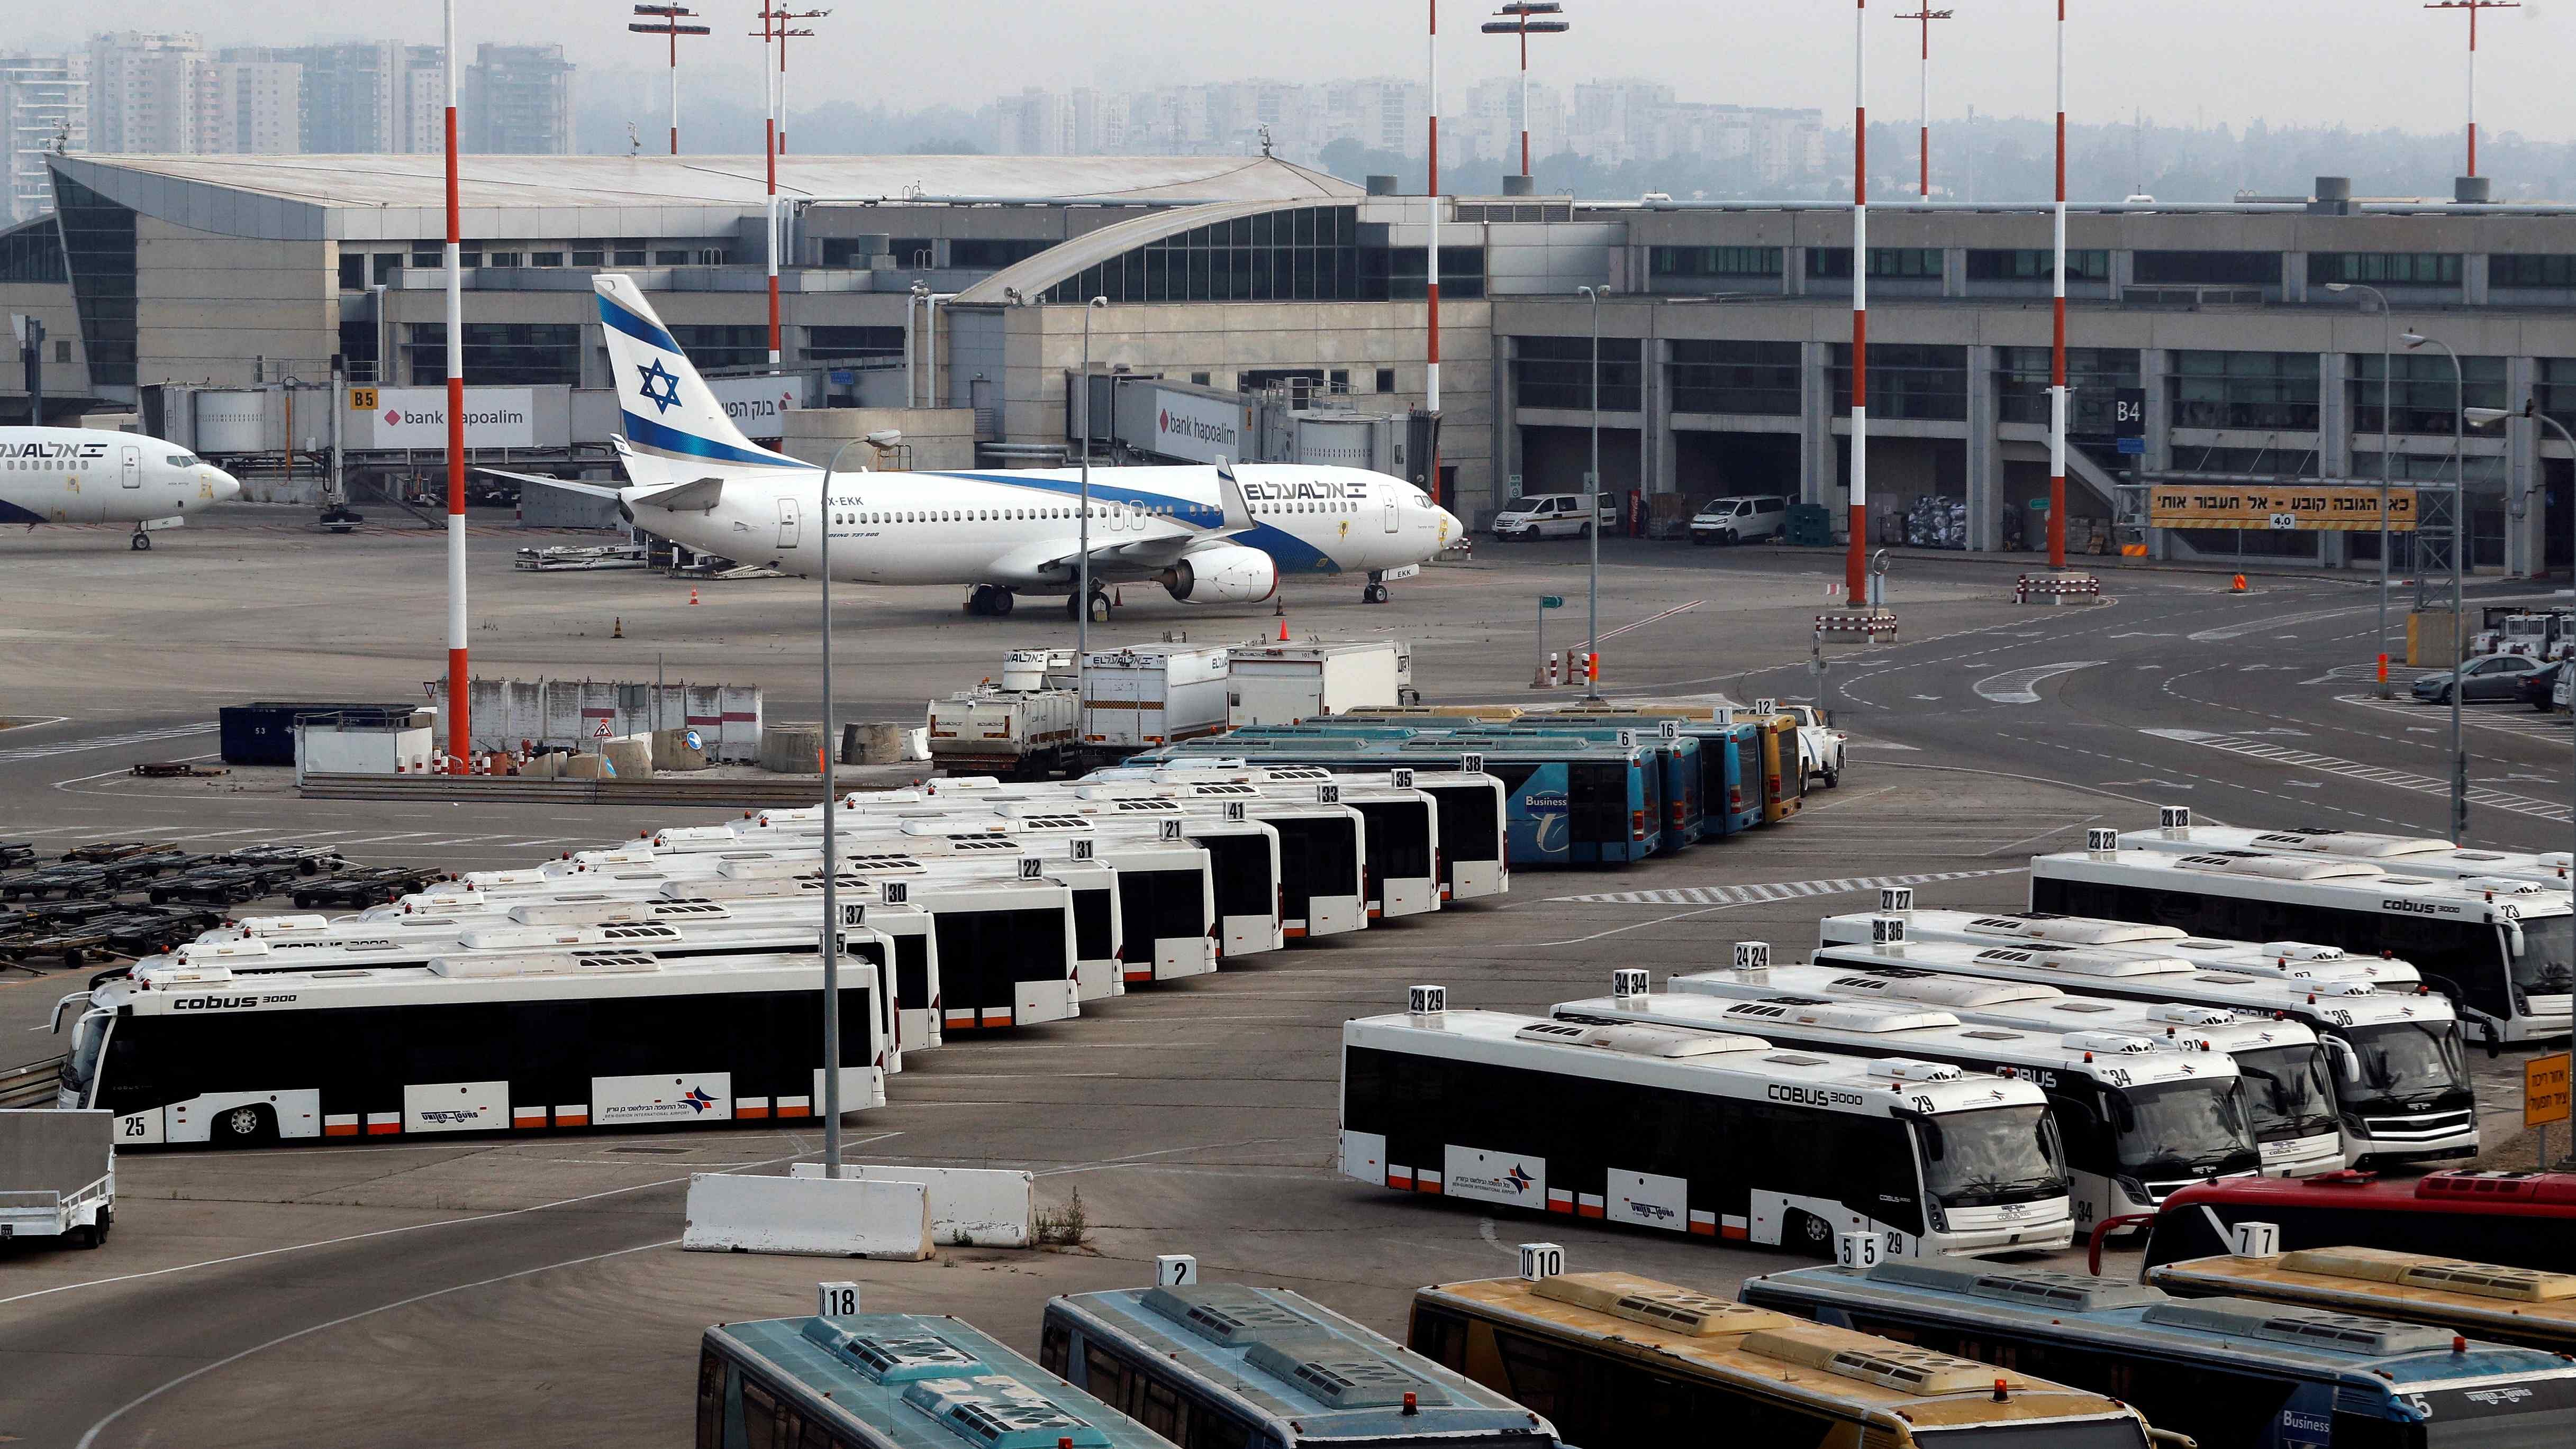 An Israeli flag carrier El Al Airlines plane is seen on the tarmac as Israel's airport. Credit: Reuters Photo